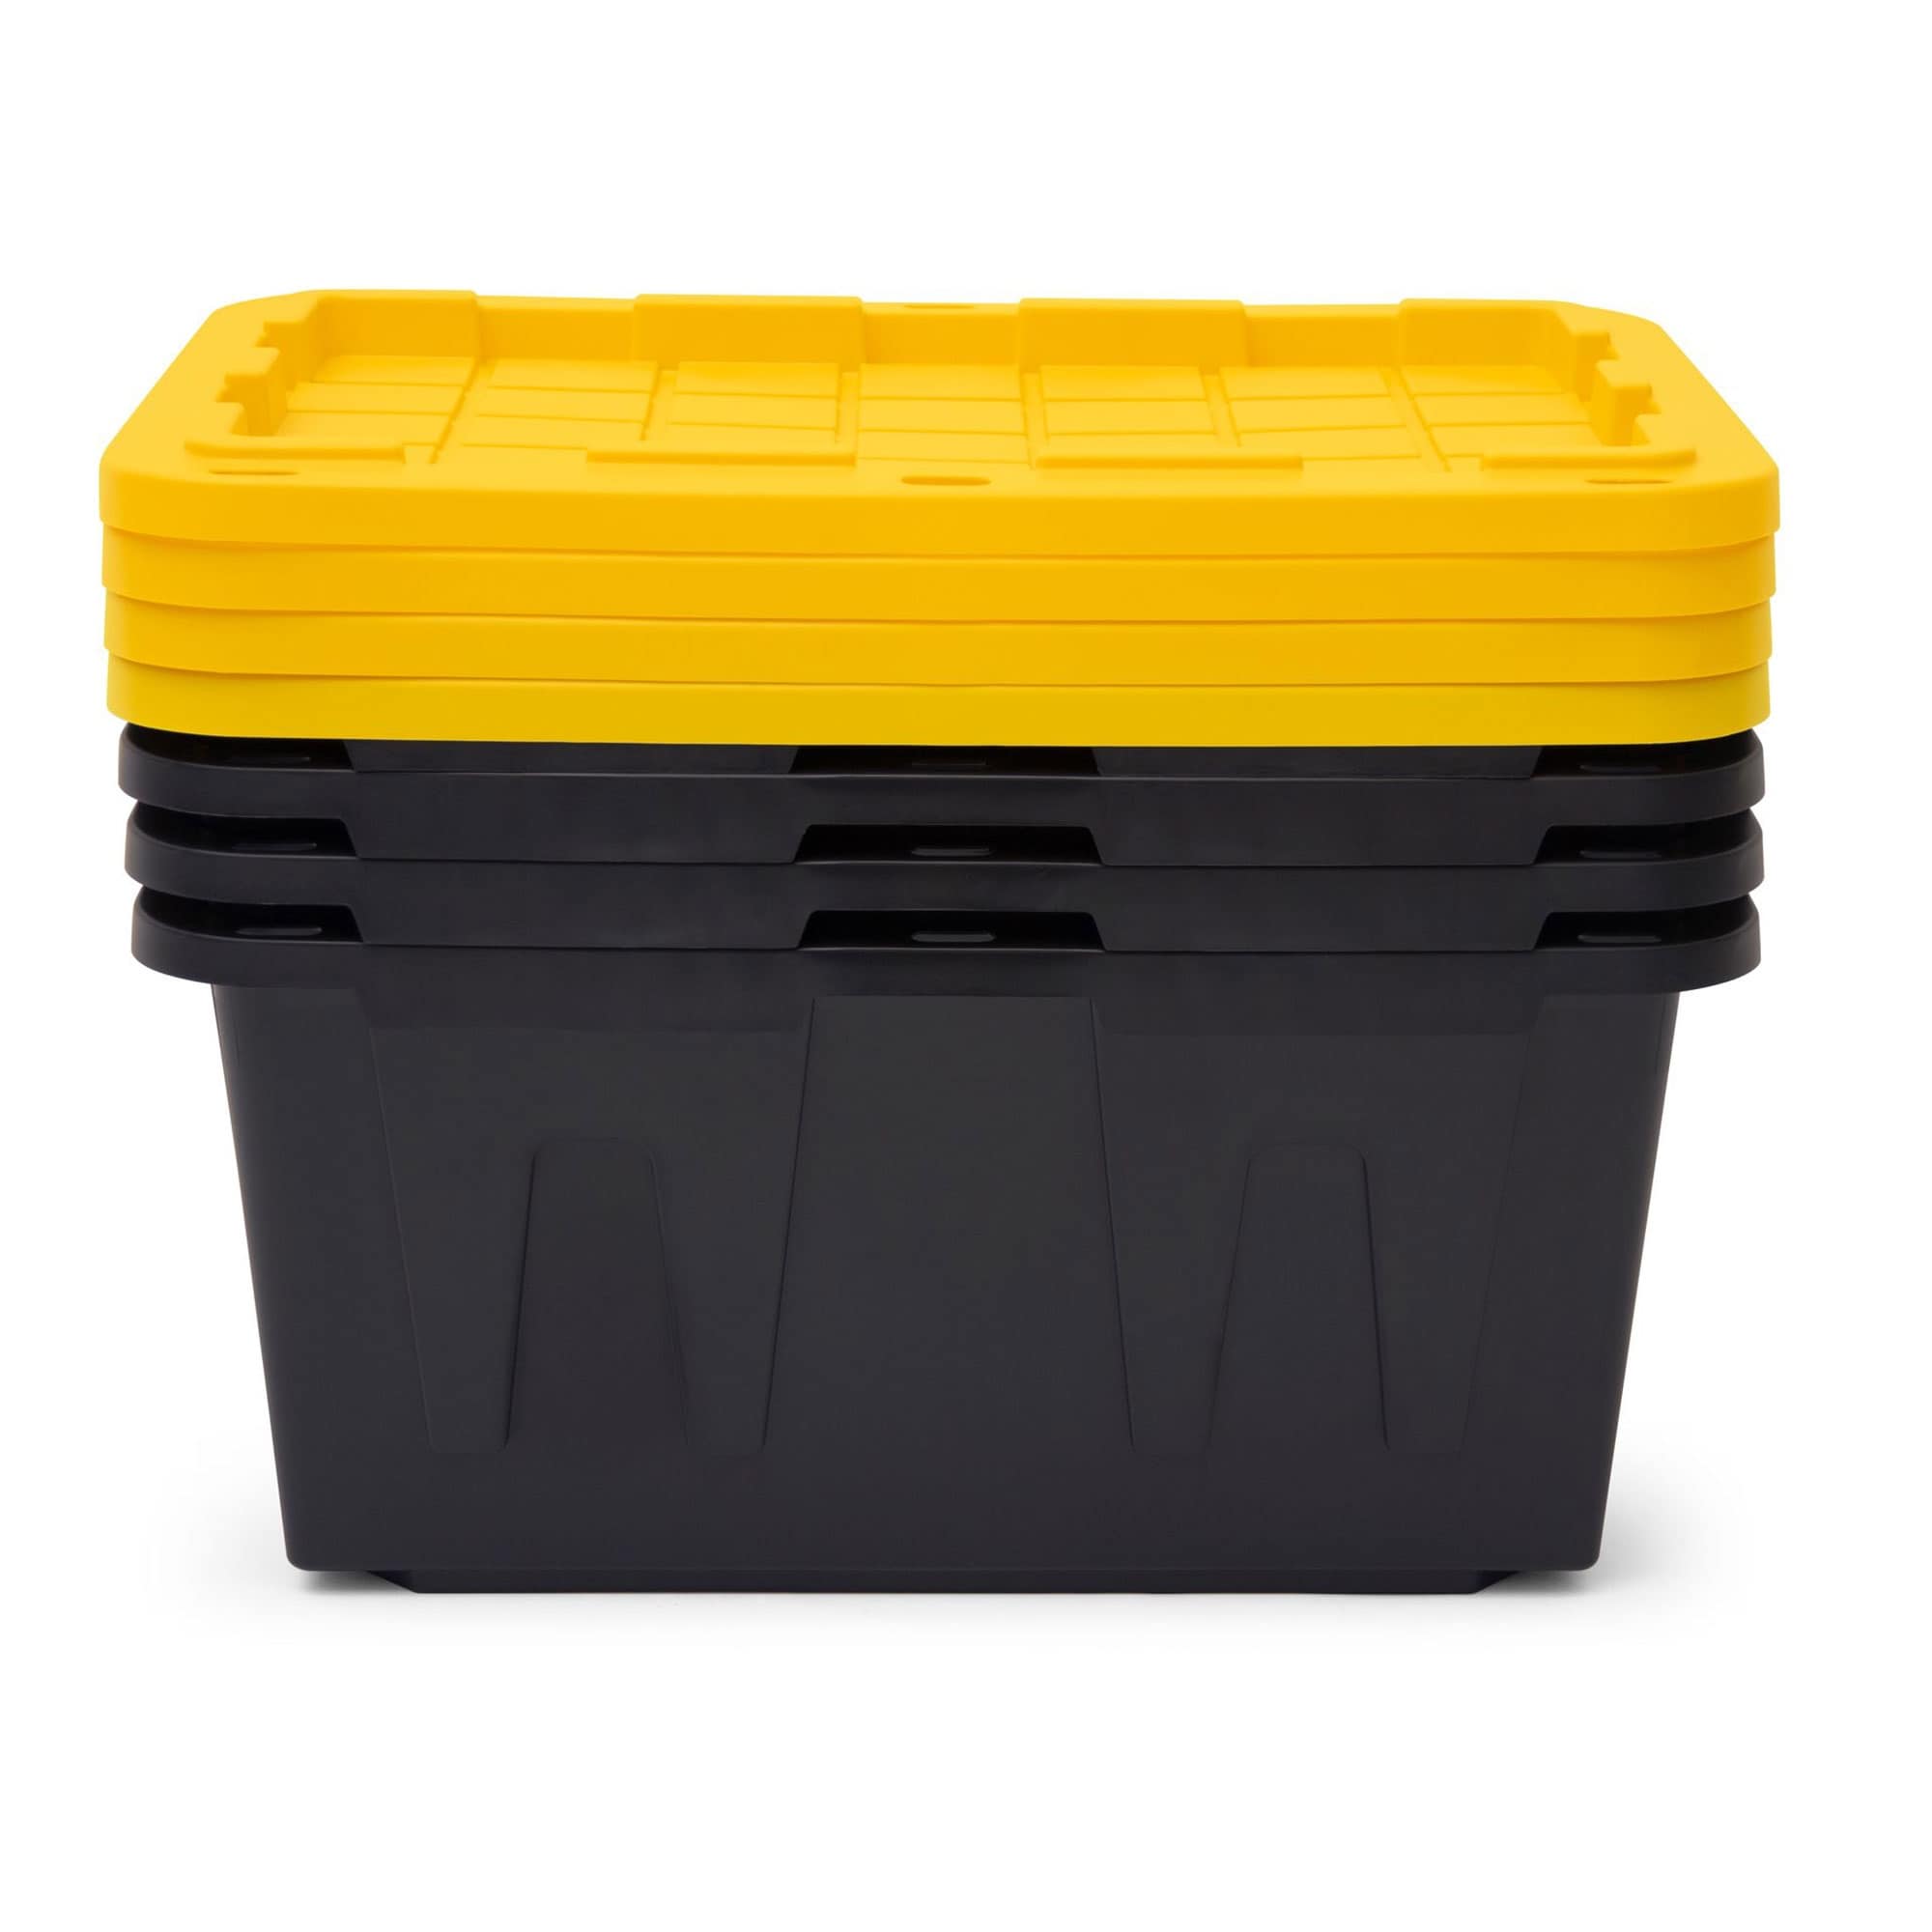 https://ak1.ostkcdn.com/images/products/is/images/direct/5fede3b7c83c8a9930eba509c08eaca9c9d182d8/TOUGH-BOX-27-Gallon-Stackable-Storage-Totes-with-Lids%2C-Black-and-Yellow-%284-pack%29.jpg